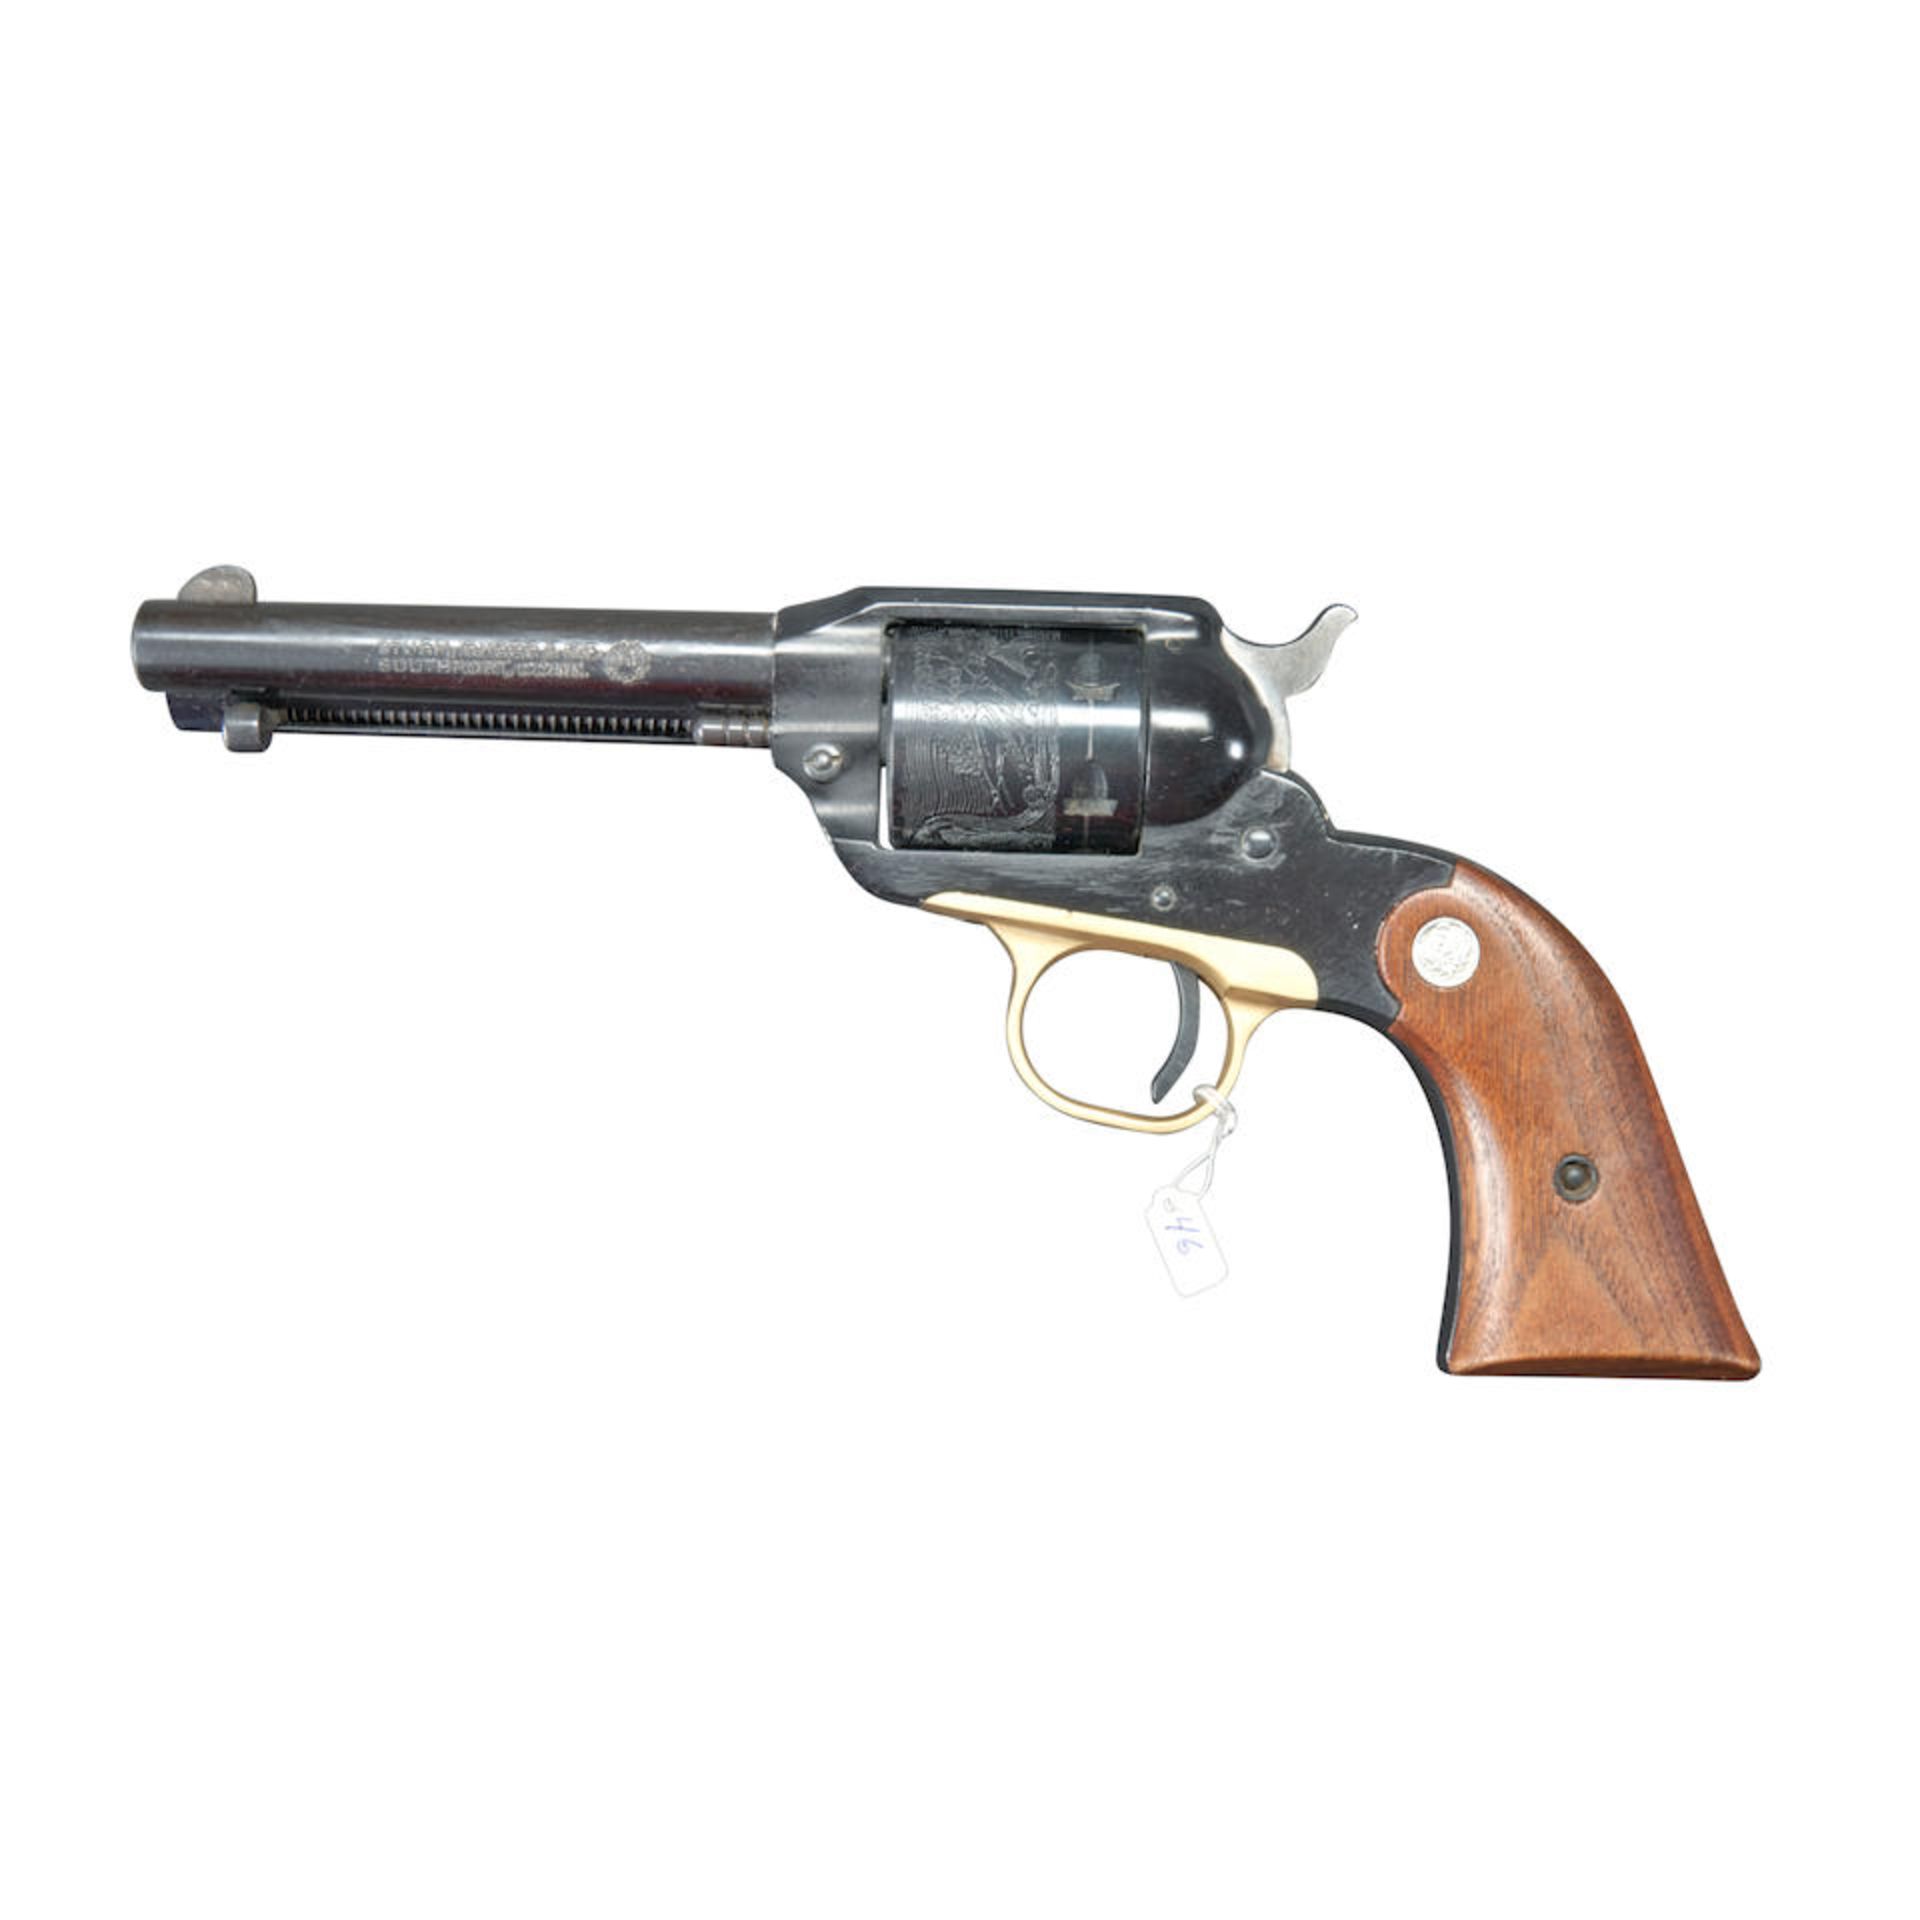 Ruger Bearcat and Super Bearcat Single Action Revolvers with Non-standard Barrel Markings, Curio... - Image 8 of 9